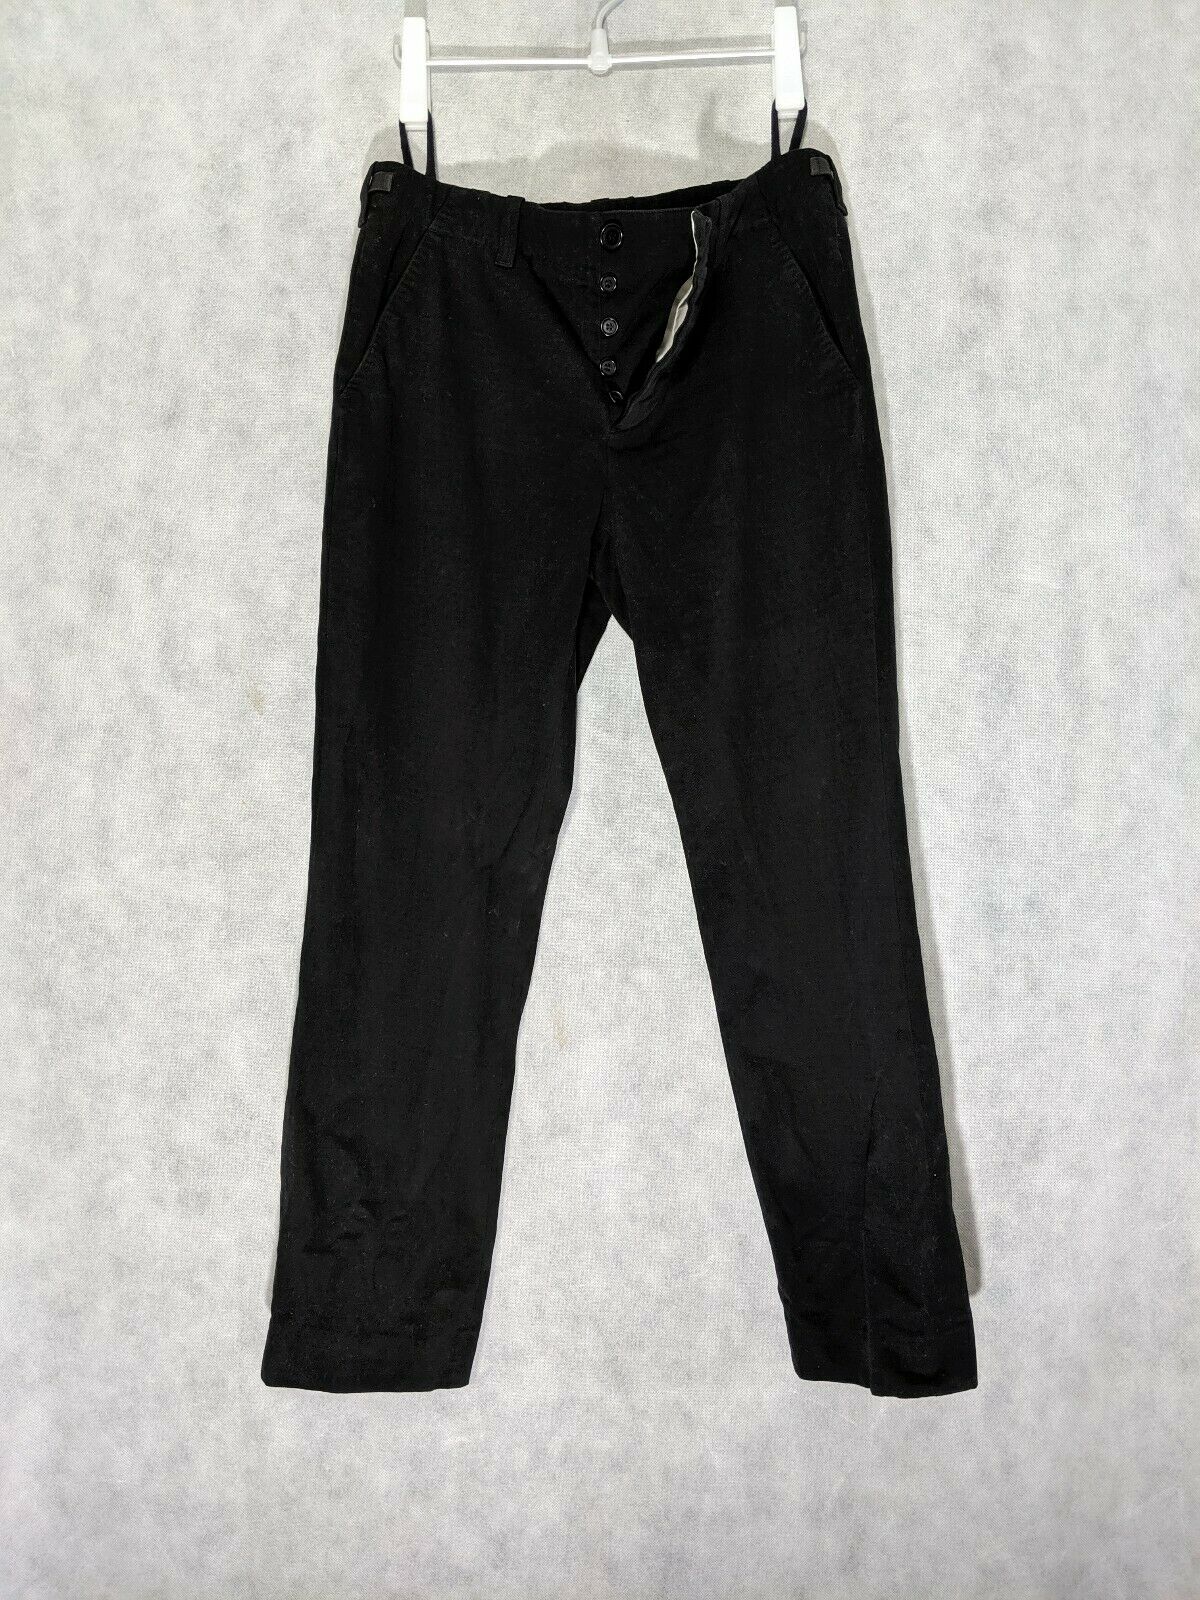 Helmut Lang Vintage Black Durable Chino Cotton Pants Side Straps 50 Italy